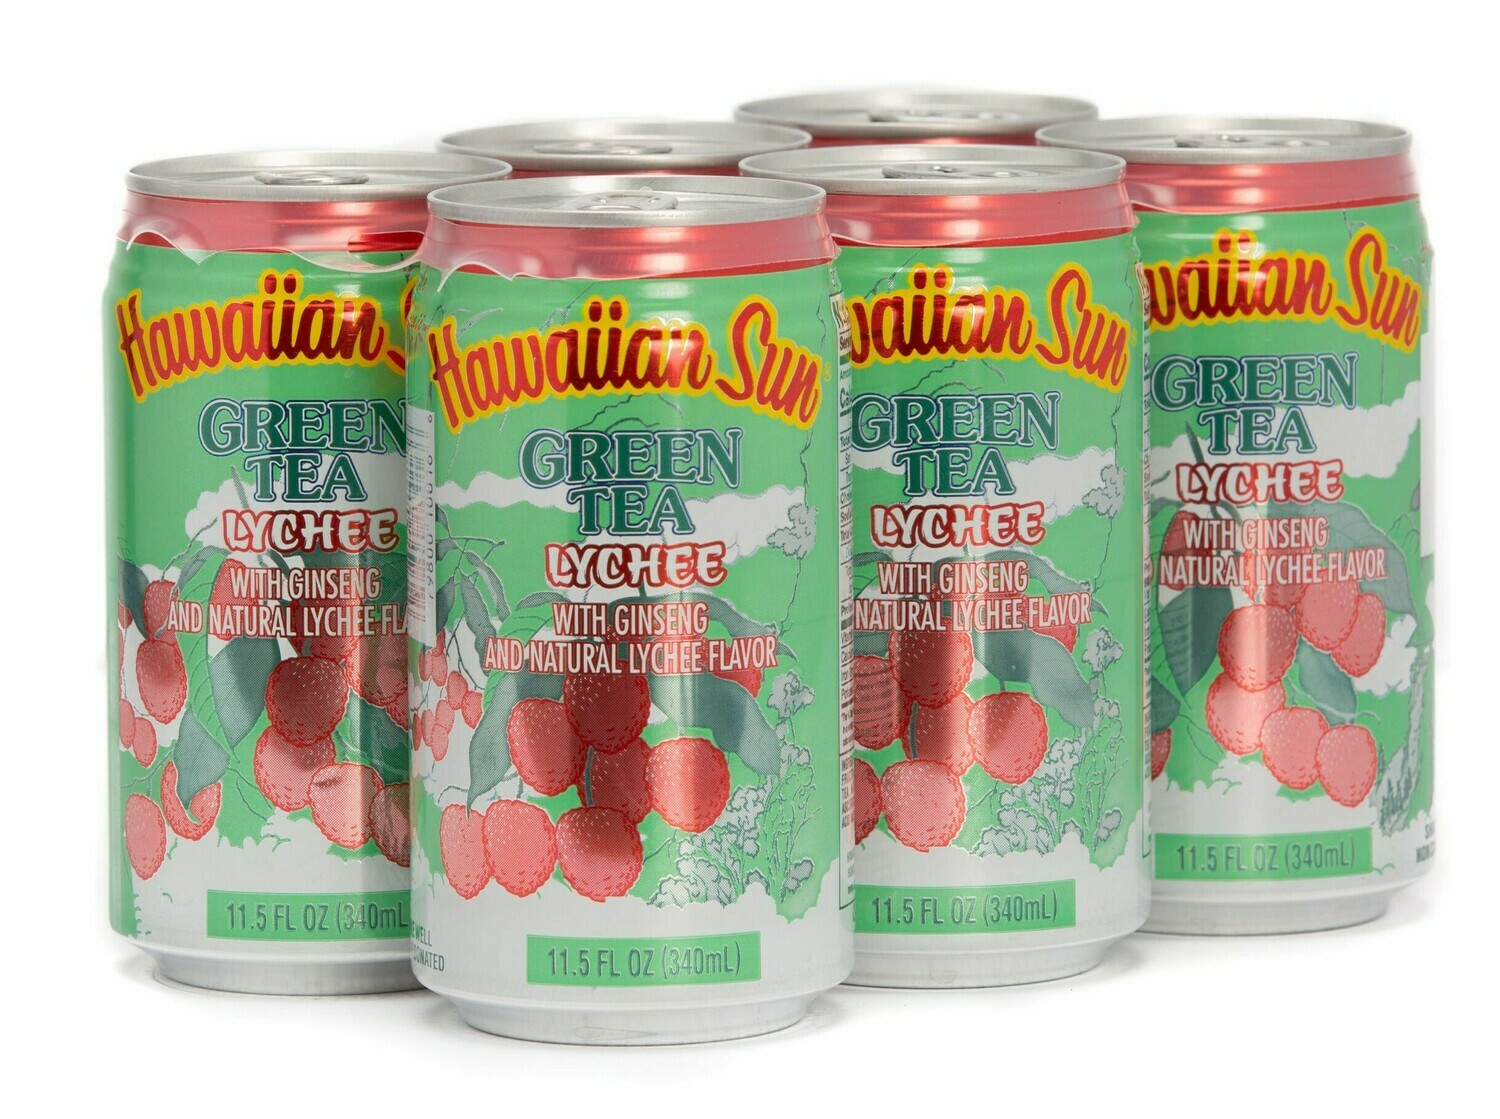 Hawaiian Sun Drink - Green Tea With Lychee 11.5 oz (Pack of 6) **Limit 8 - 6/pks total per purchase transaction**